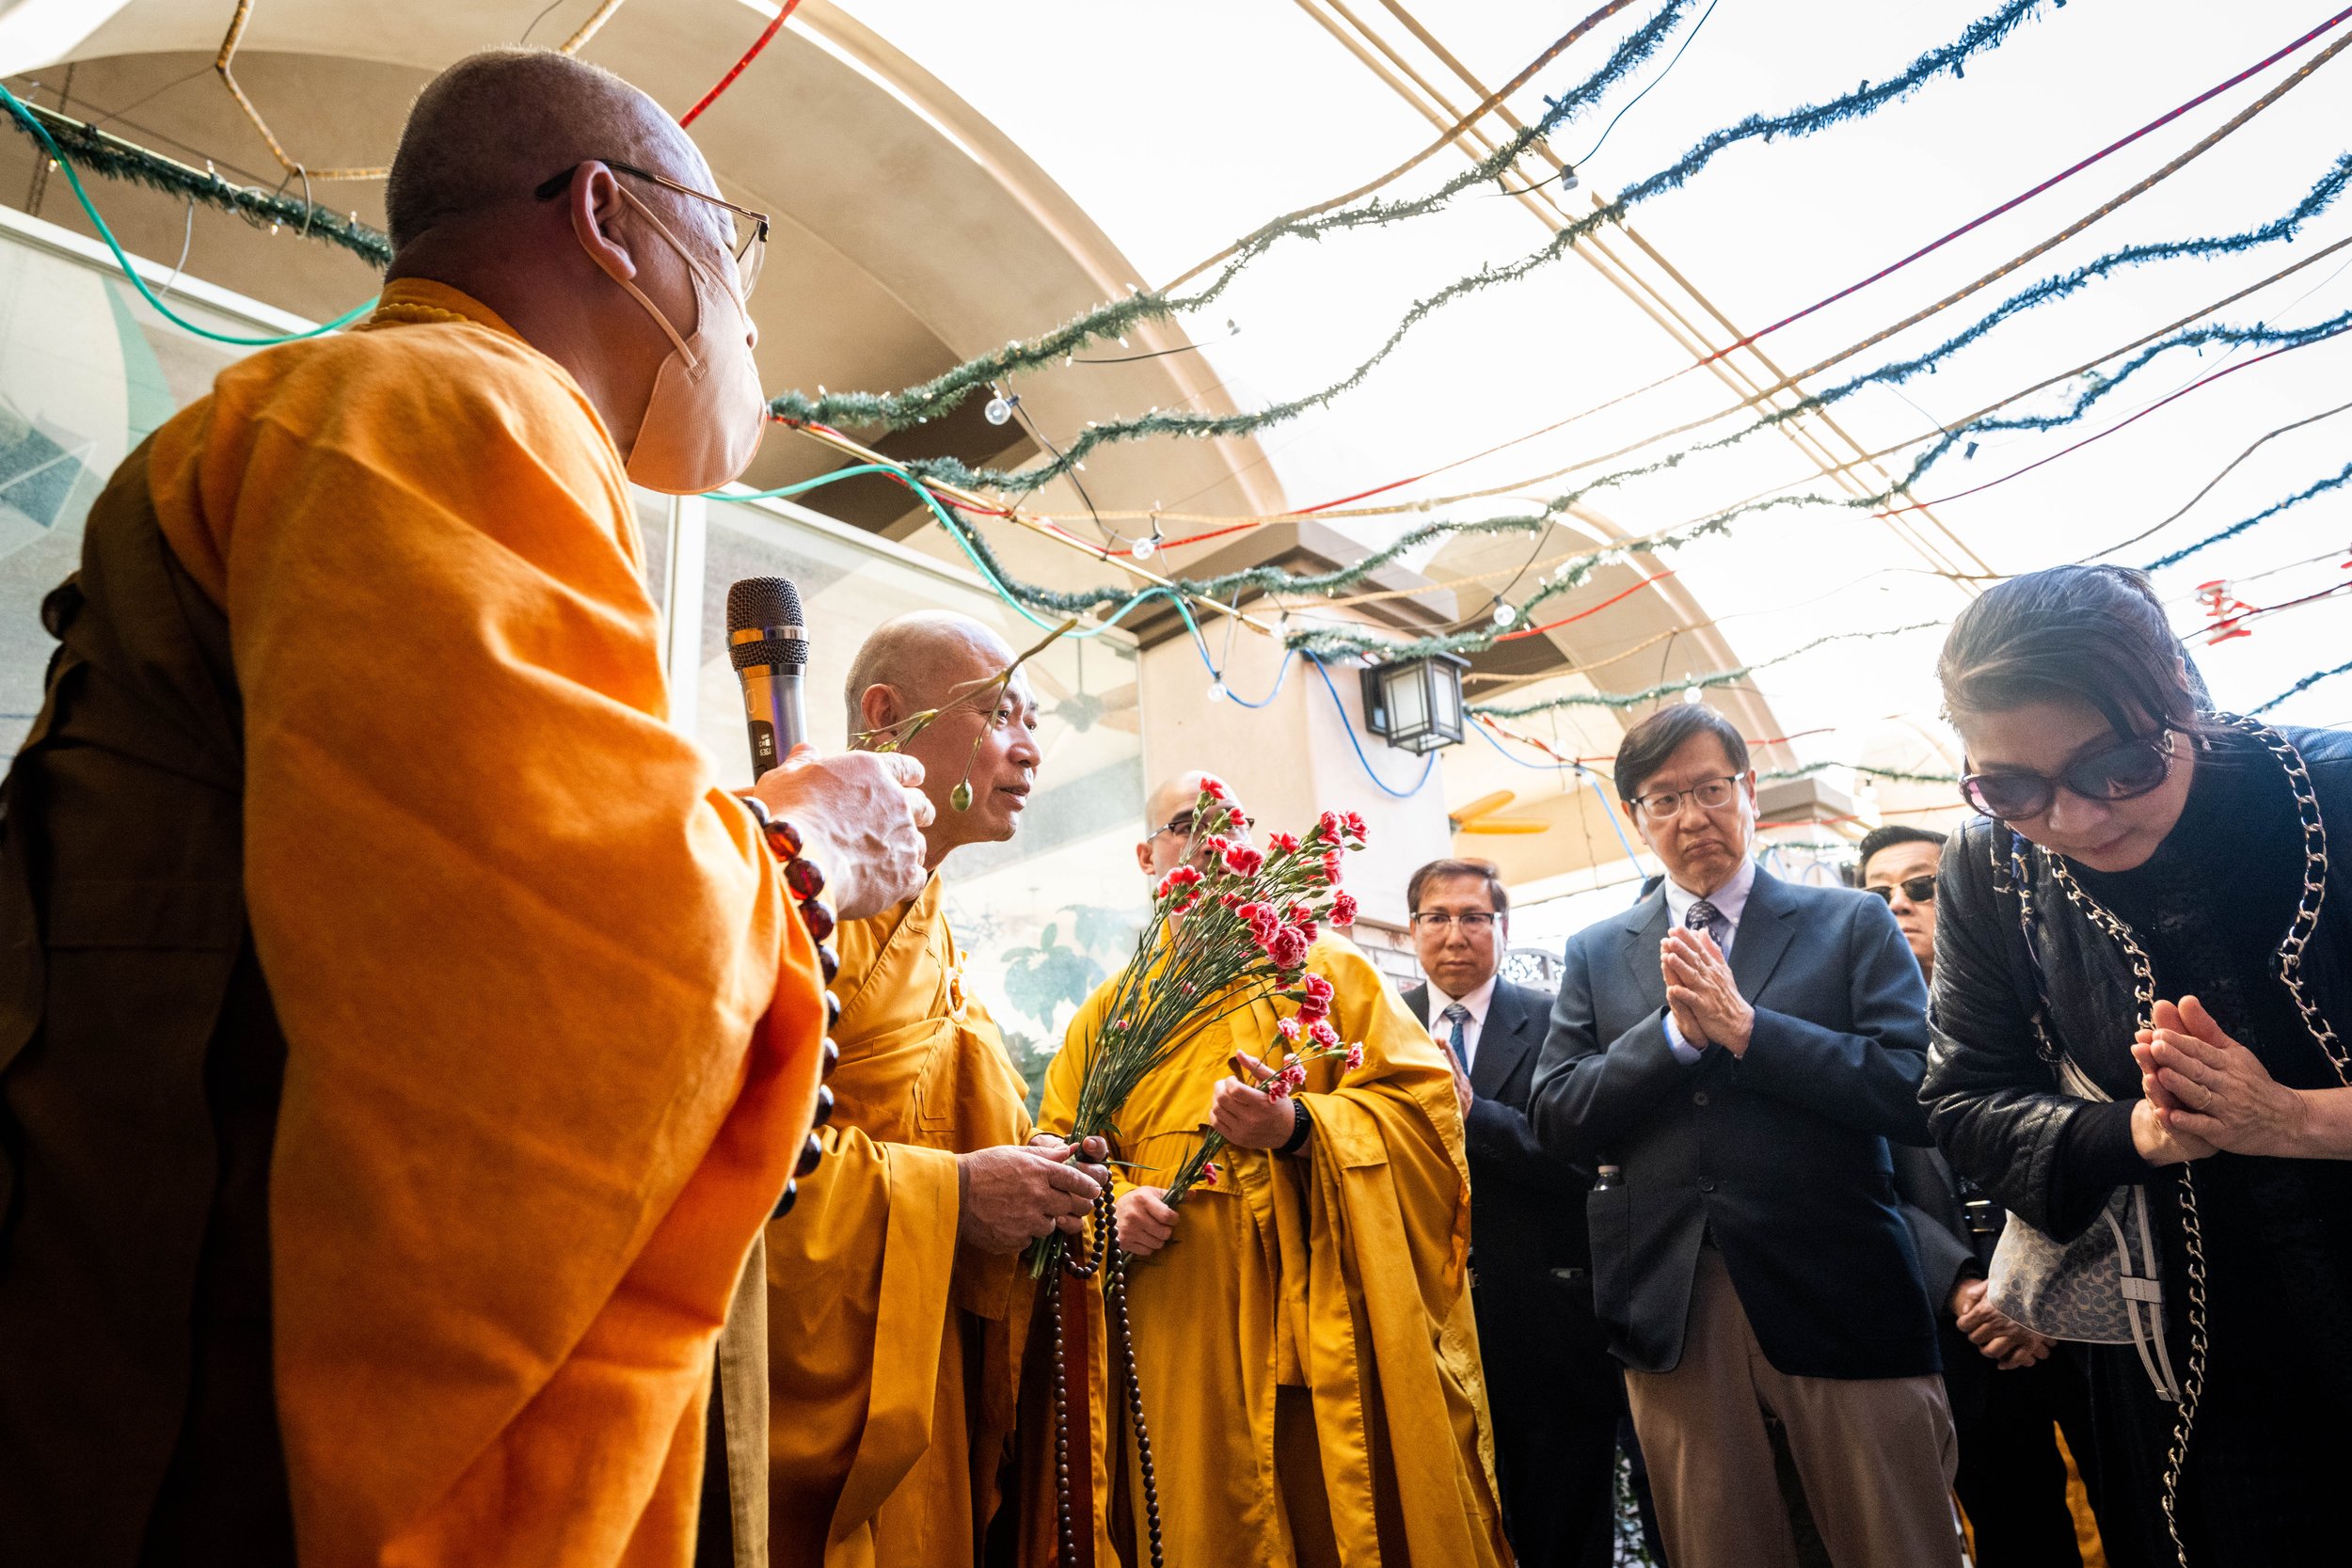  Dieu Phap Temple monks hold a service for those killed in the Monterey Park mass shooting at Star Ballroom Dance Studio with owner Maria Liang, right, on Friday, January 27, 2023.  